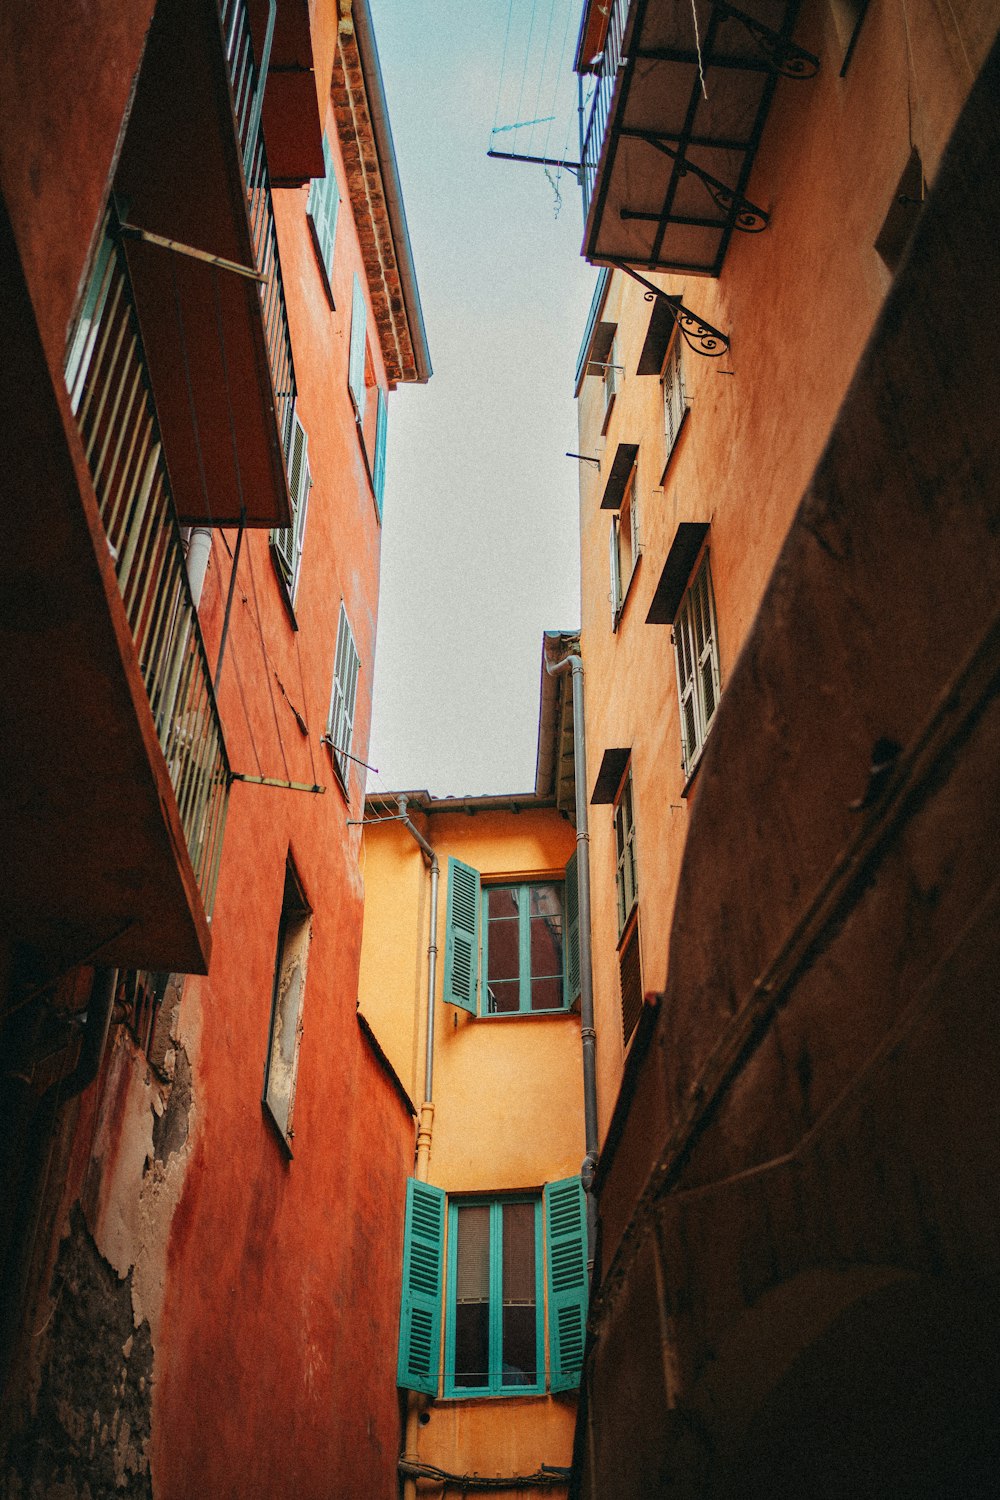 a narrow alleyway between two buildings with shutters open